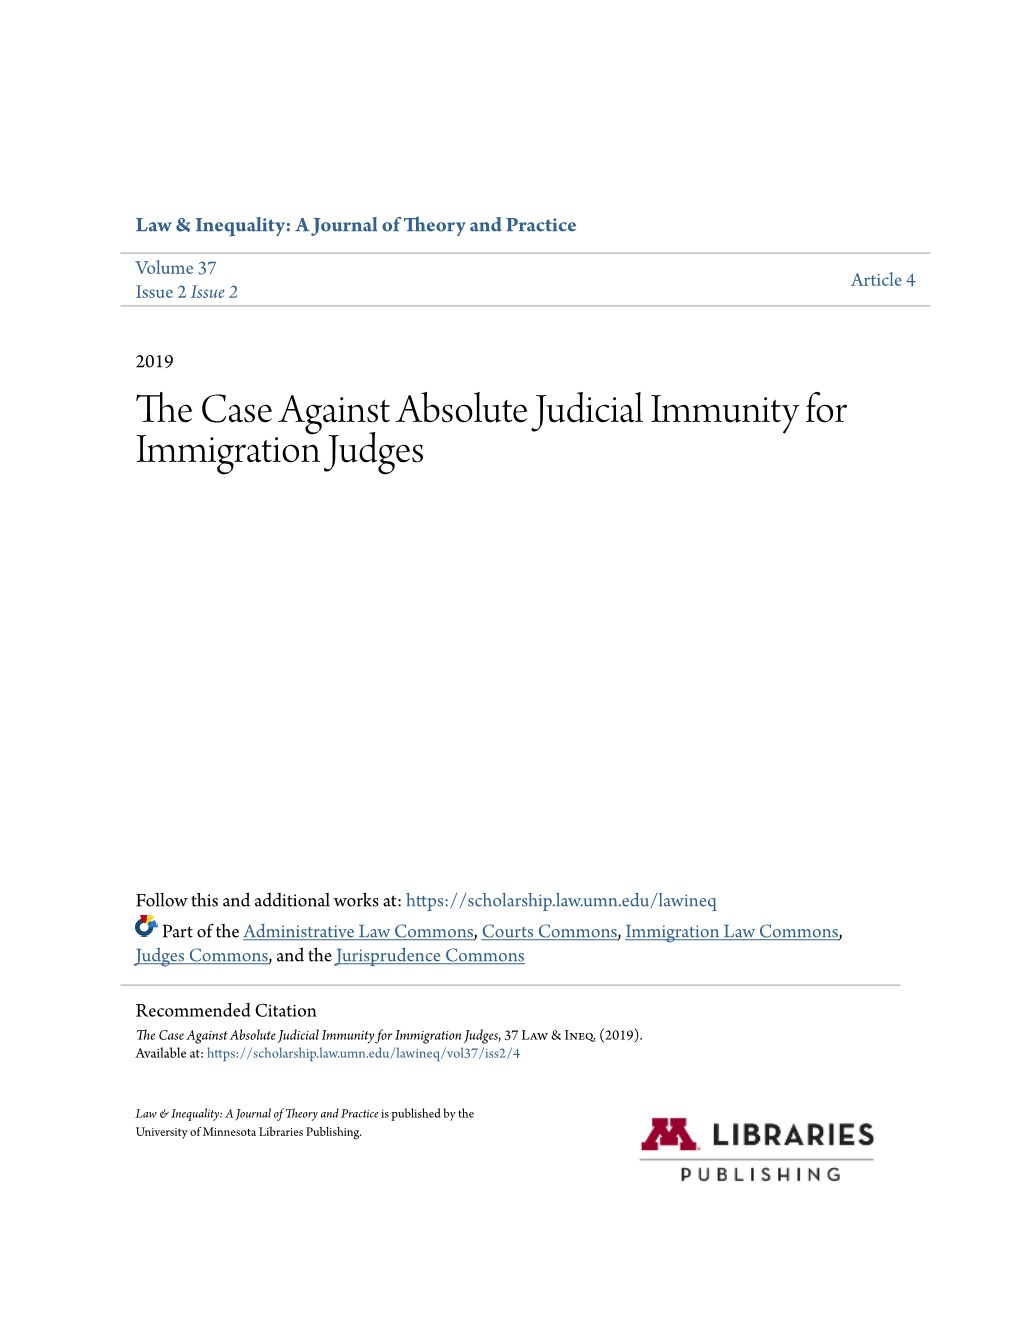 The Case Against Absolute Judicial Immunity for Immigration Judges, 37 Law & Ineq